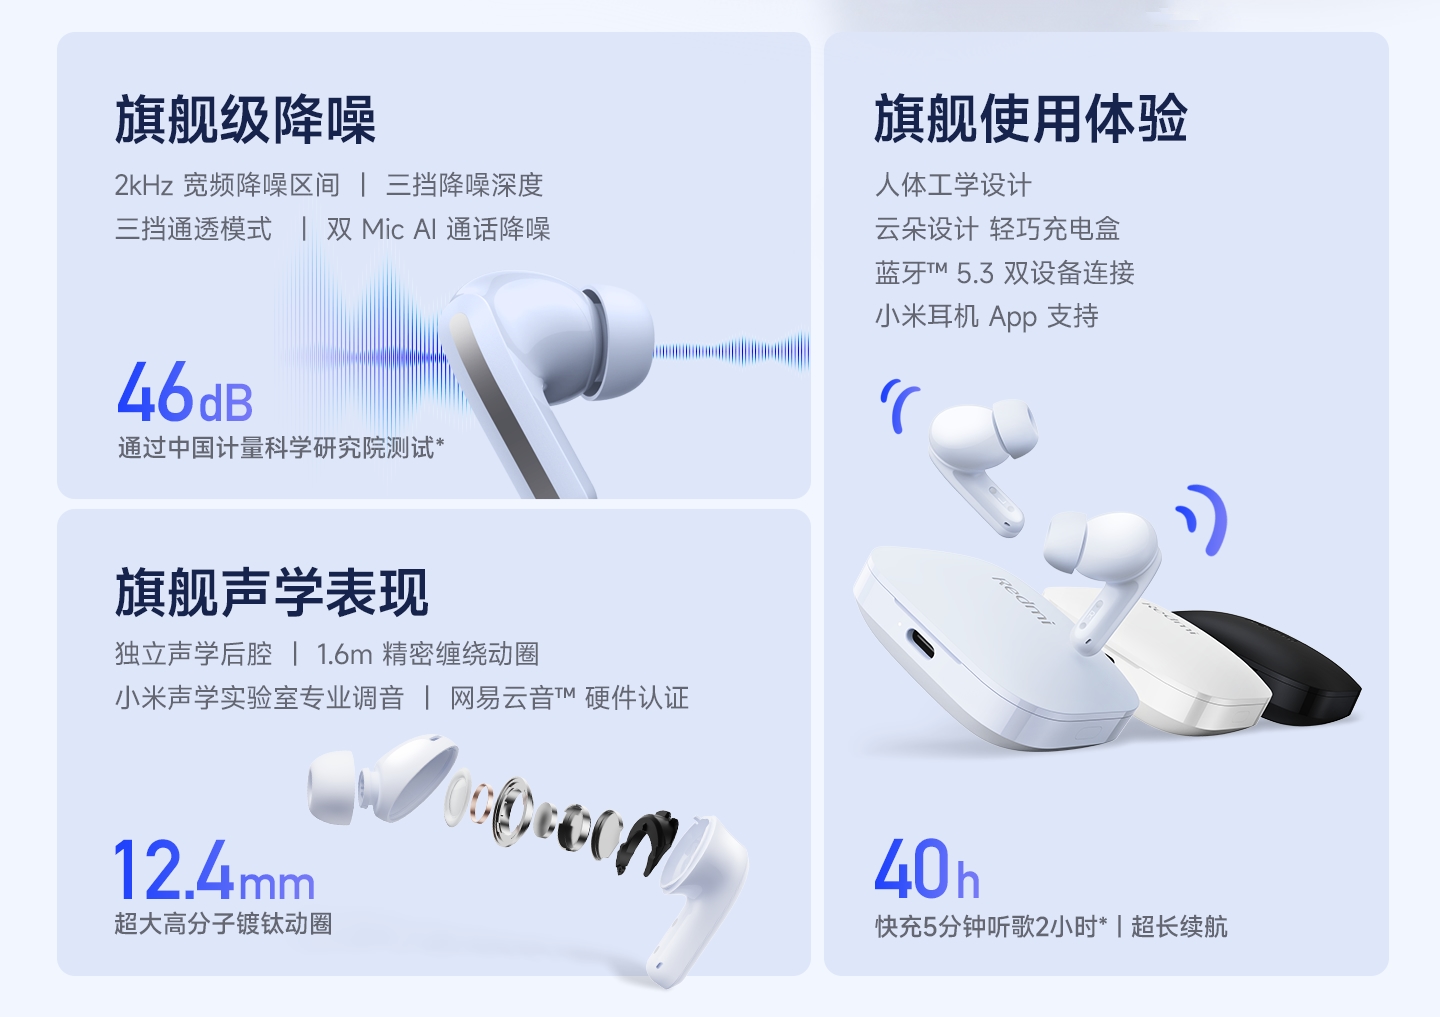 Redmi Buds 5 with 46dB ANC, up to 40h total playback announced